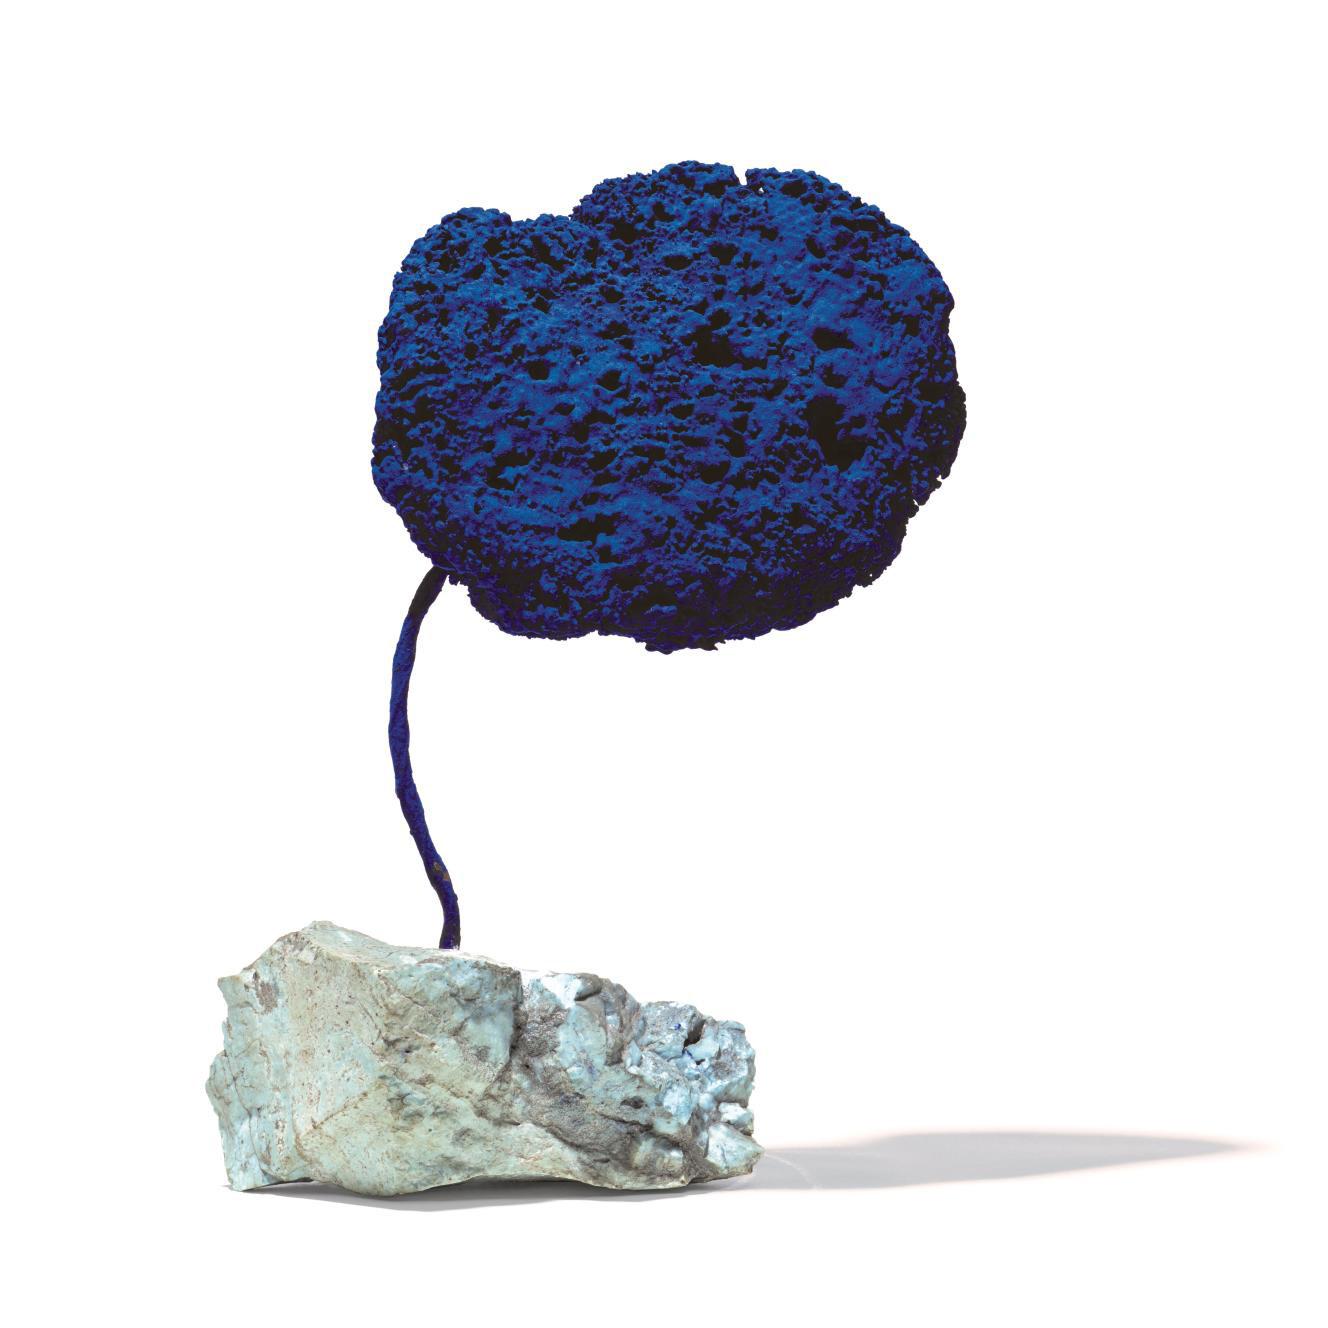 Yves Klein: In Search of Infinity 